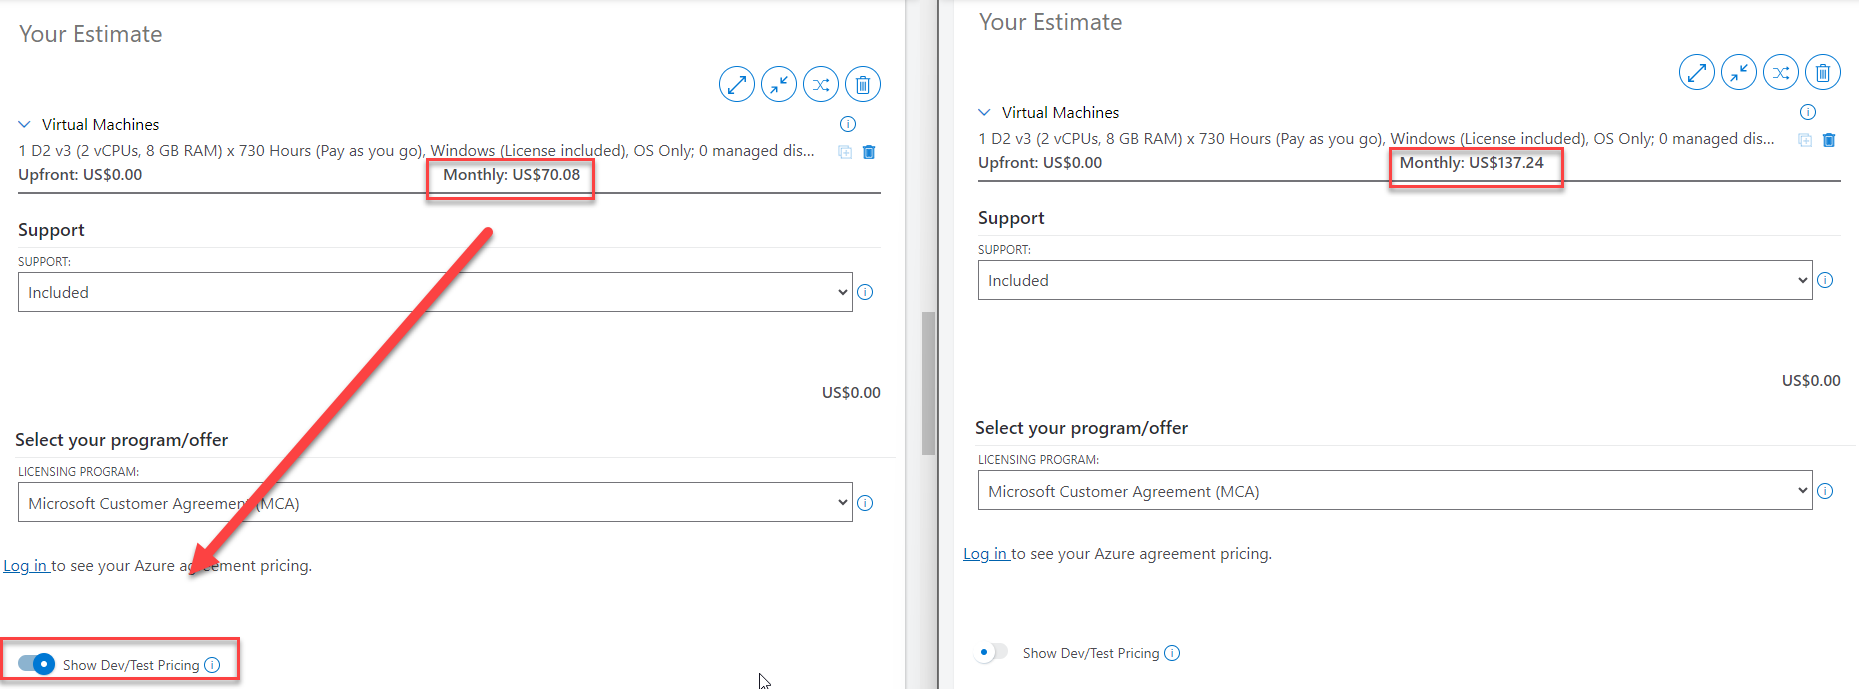 Azure VM Pay-as-you-go and Dev/Test pricing